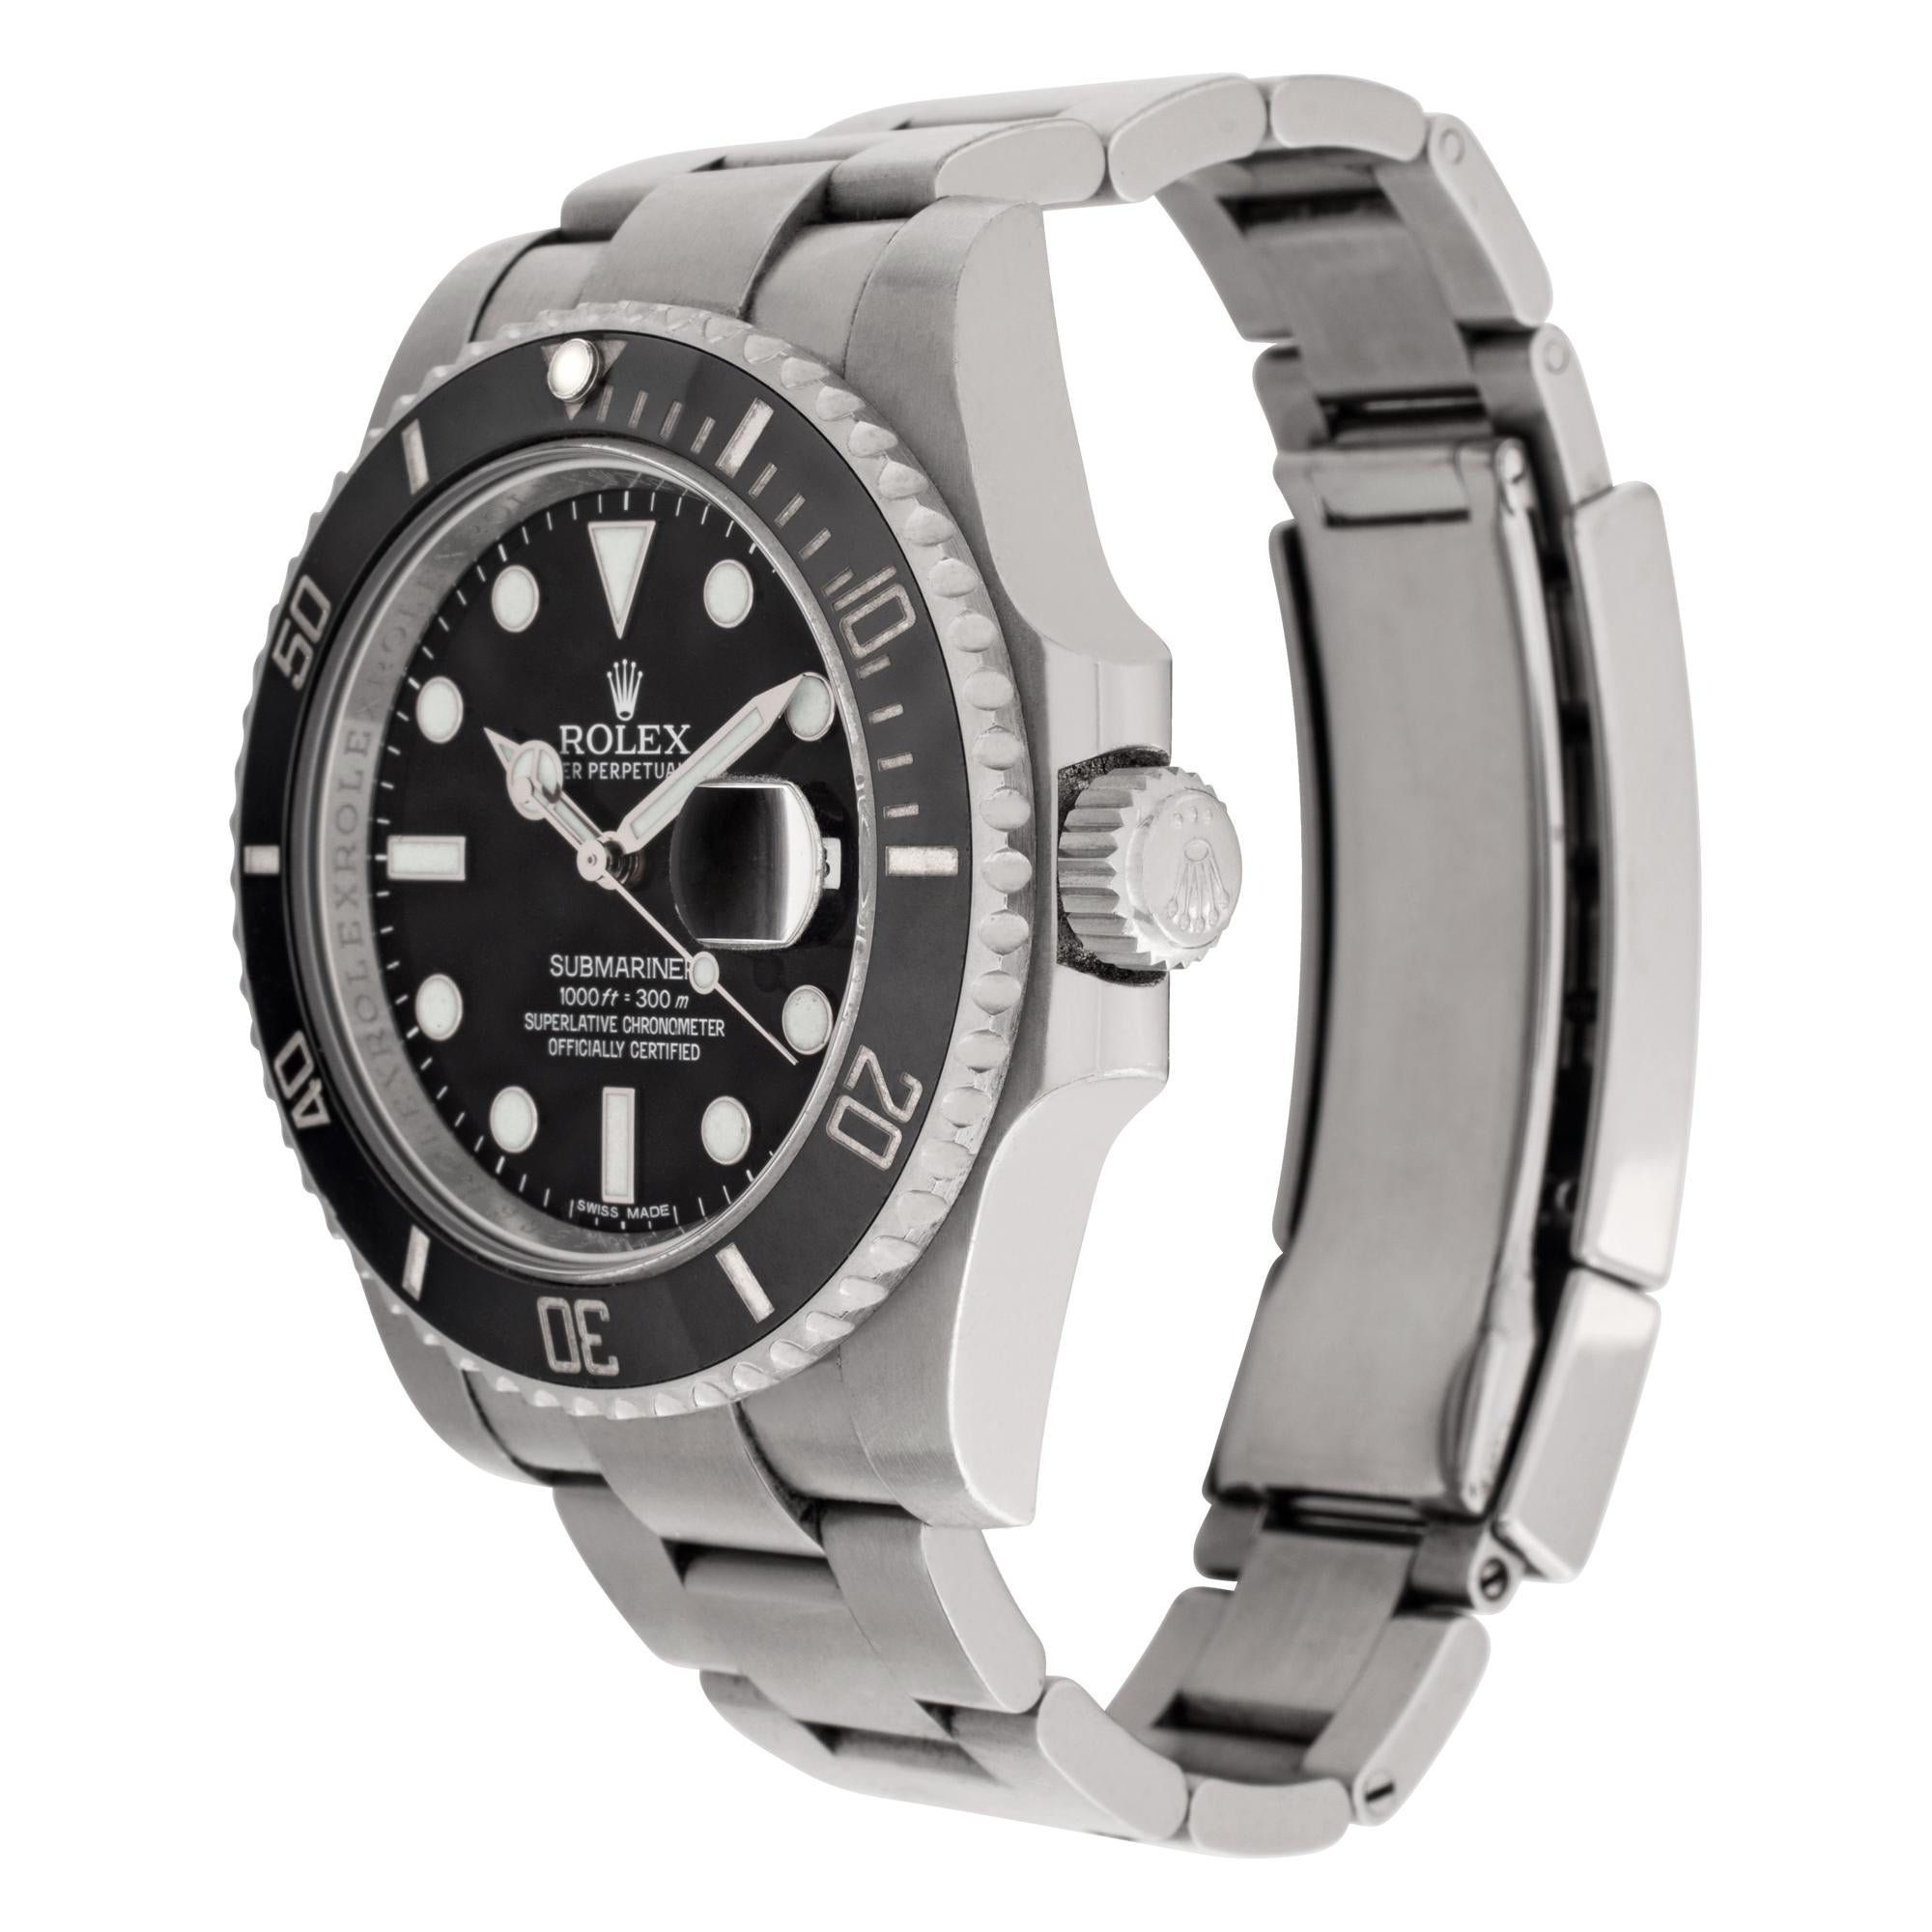 Rolex Submariner in stainless steel with ceramic bezel. Auto w/ sweep seconds and date. 40 mm case size.With papers. **Bank wire only at this price** Ref 116610ln. Circa 2013. Fine Pre-owned Rolex Watch. Certified preowned Sport Rolex Submariner